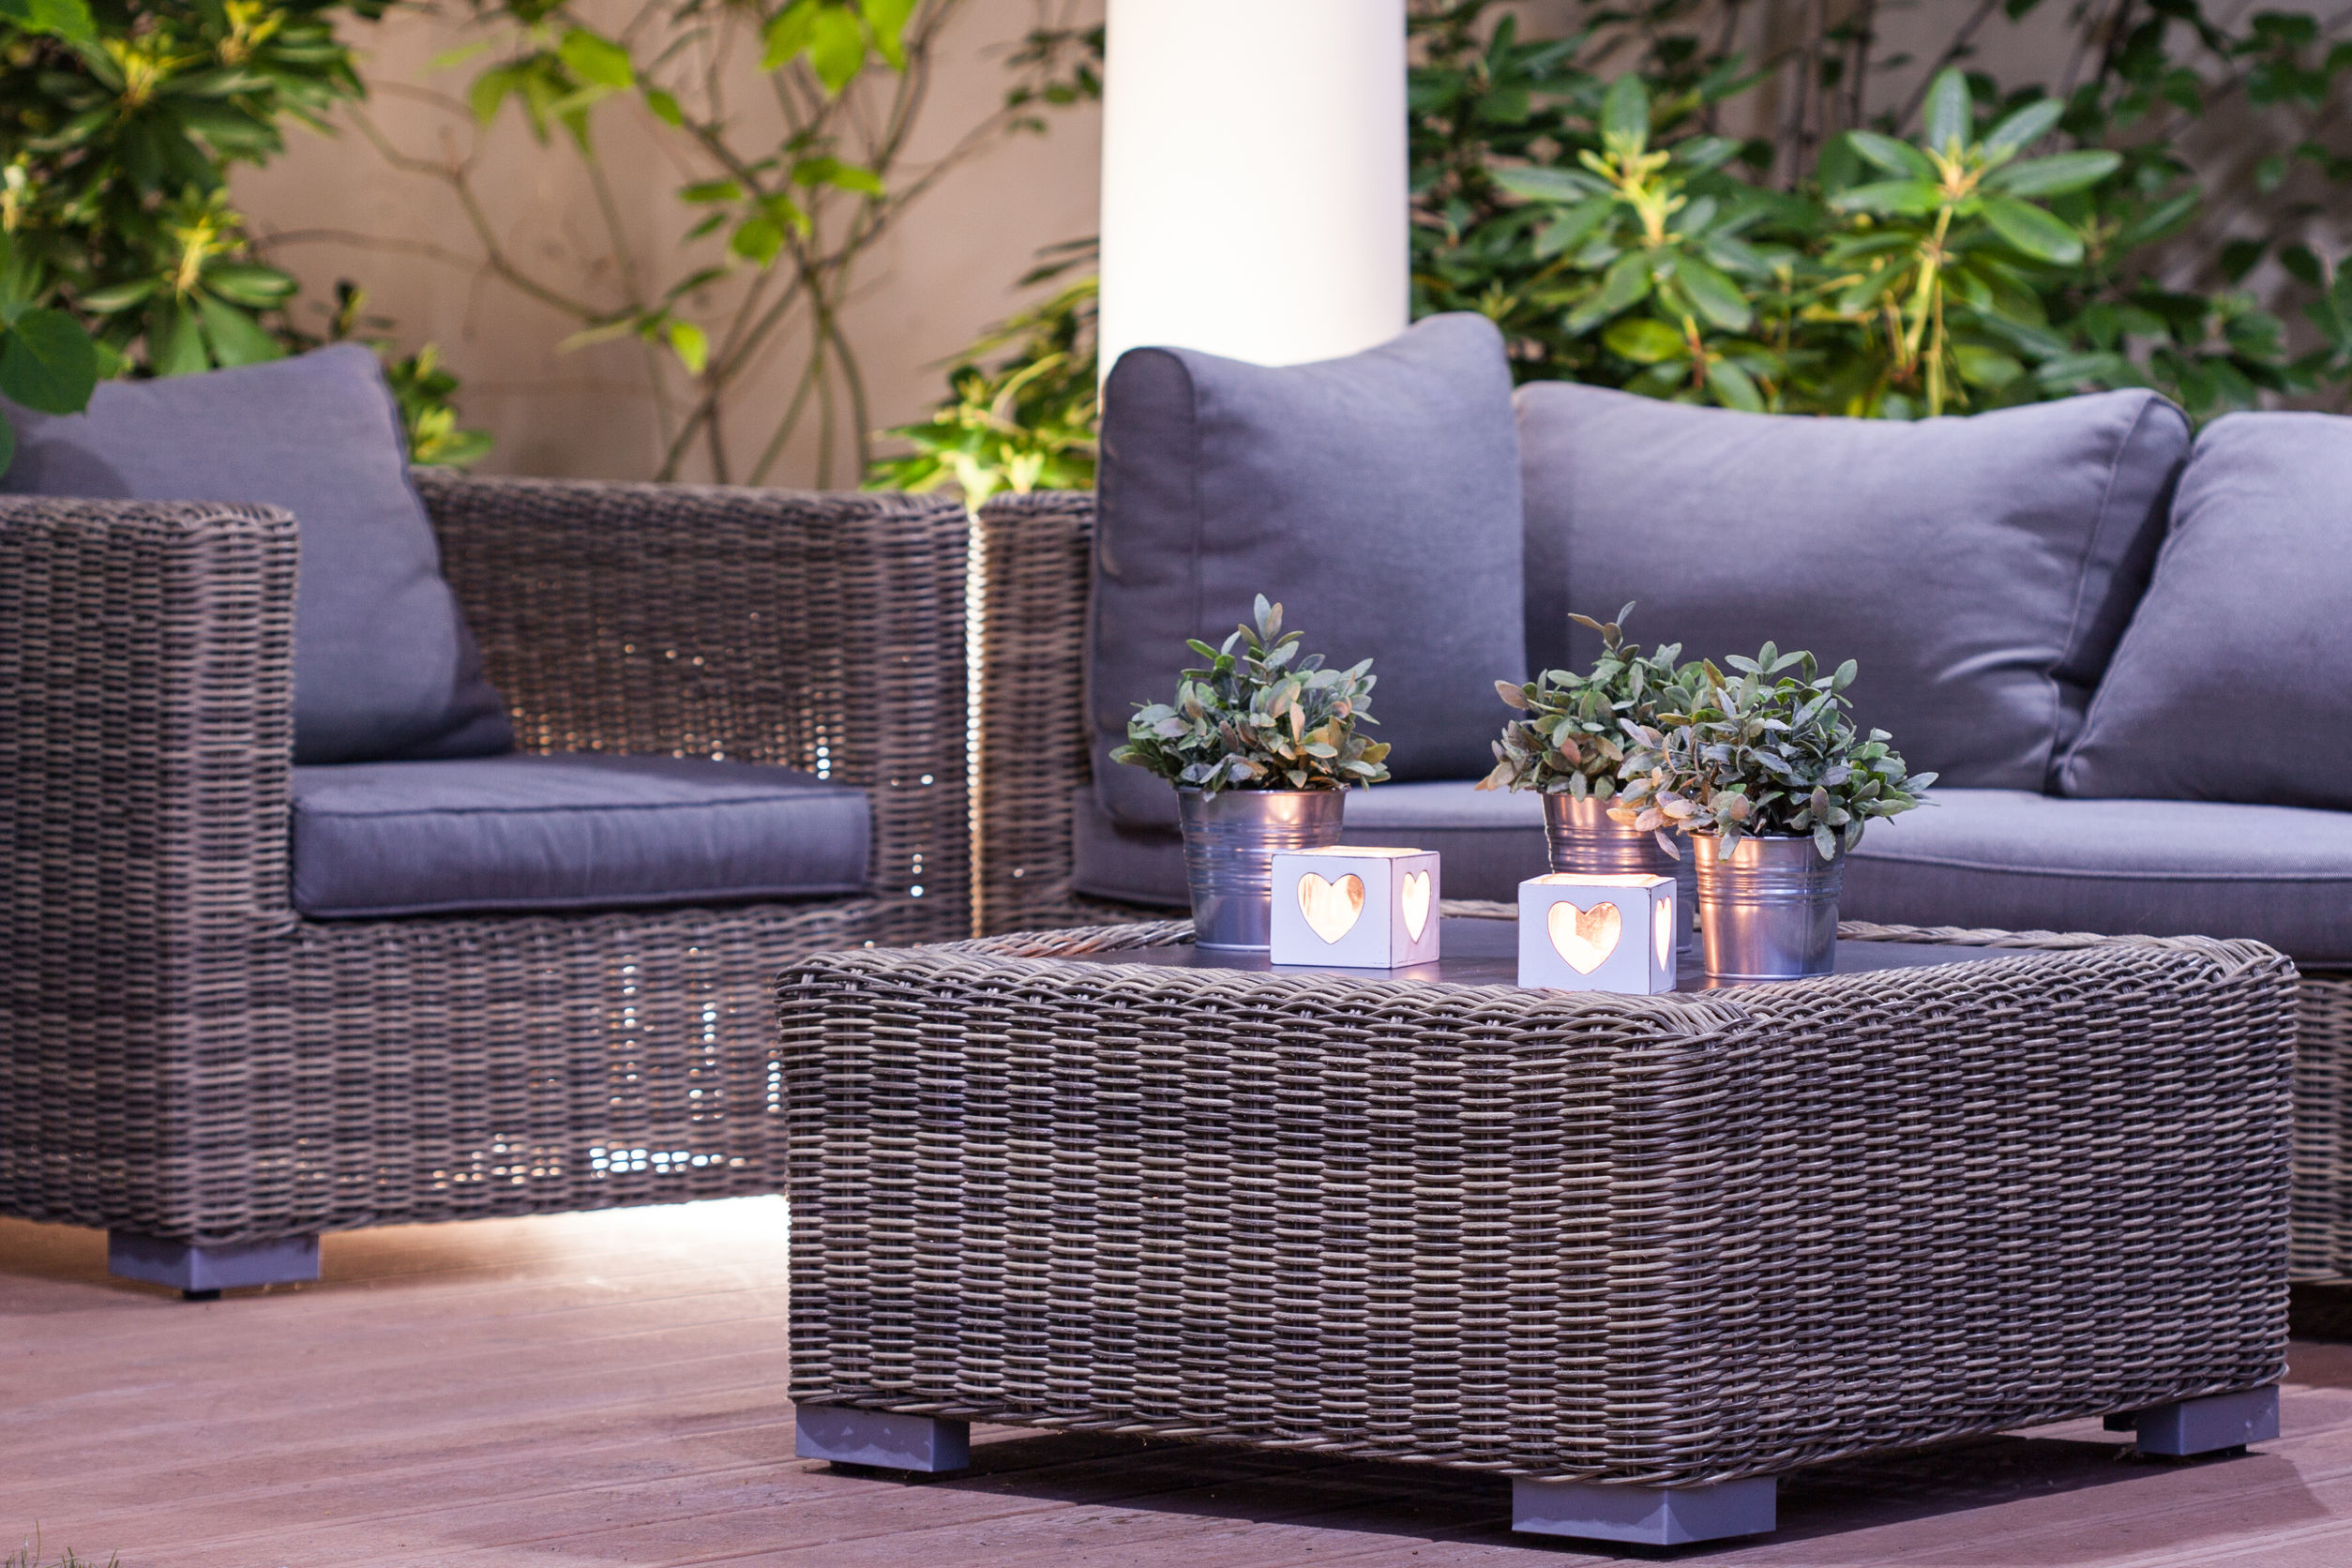 5 Mistakes to Avoid When Buying Patio Cushions